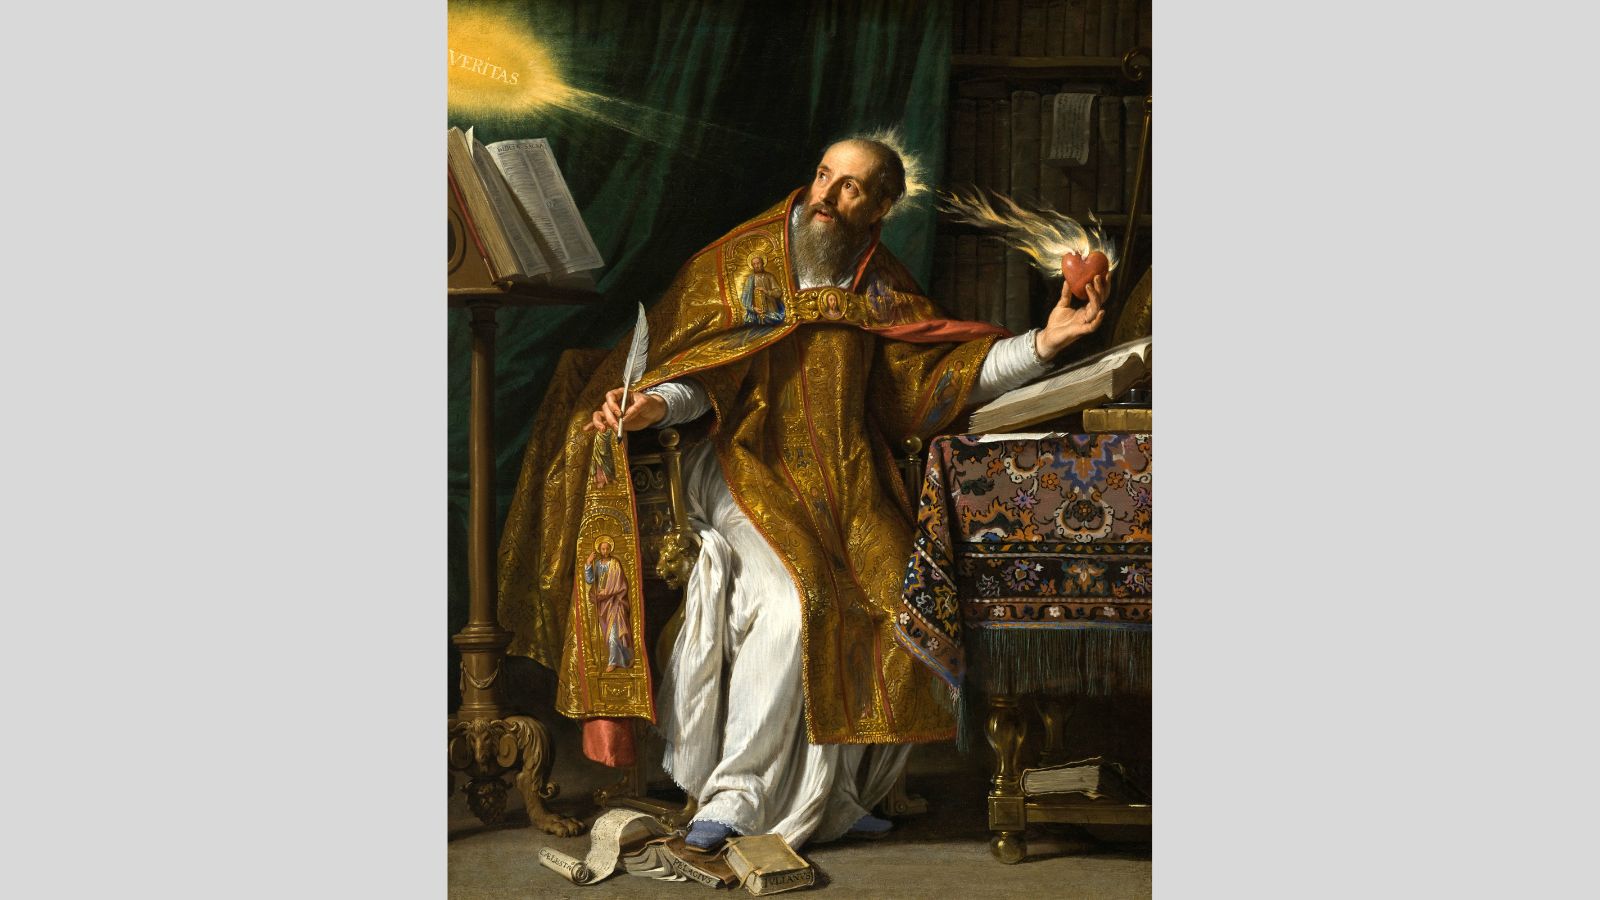 <p>Saint Augustine, a renowned theologian and intellectual hailing from North Africa, witnessed the decline of the Roman Empire during his lifetime. In his seminal work, “Confessions,” Augustine navigates the intersections of his earthly experiences and spiritual quest, intertwining personal anecdotes with profound philosophical reflections on faith. Structured like biblical narratives, this monumental opus comprises twelve books chronicling Augustine’s journey of self-discovery and redemption amidst the tumultuous backdrop of the early first millennium’s dark ages.</p>